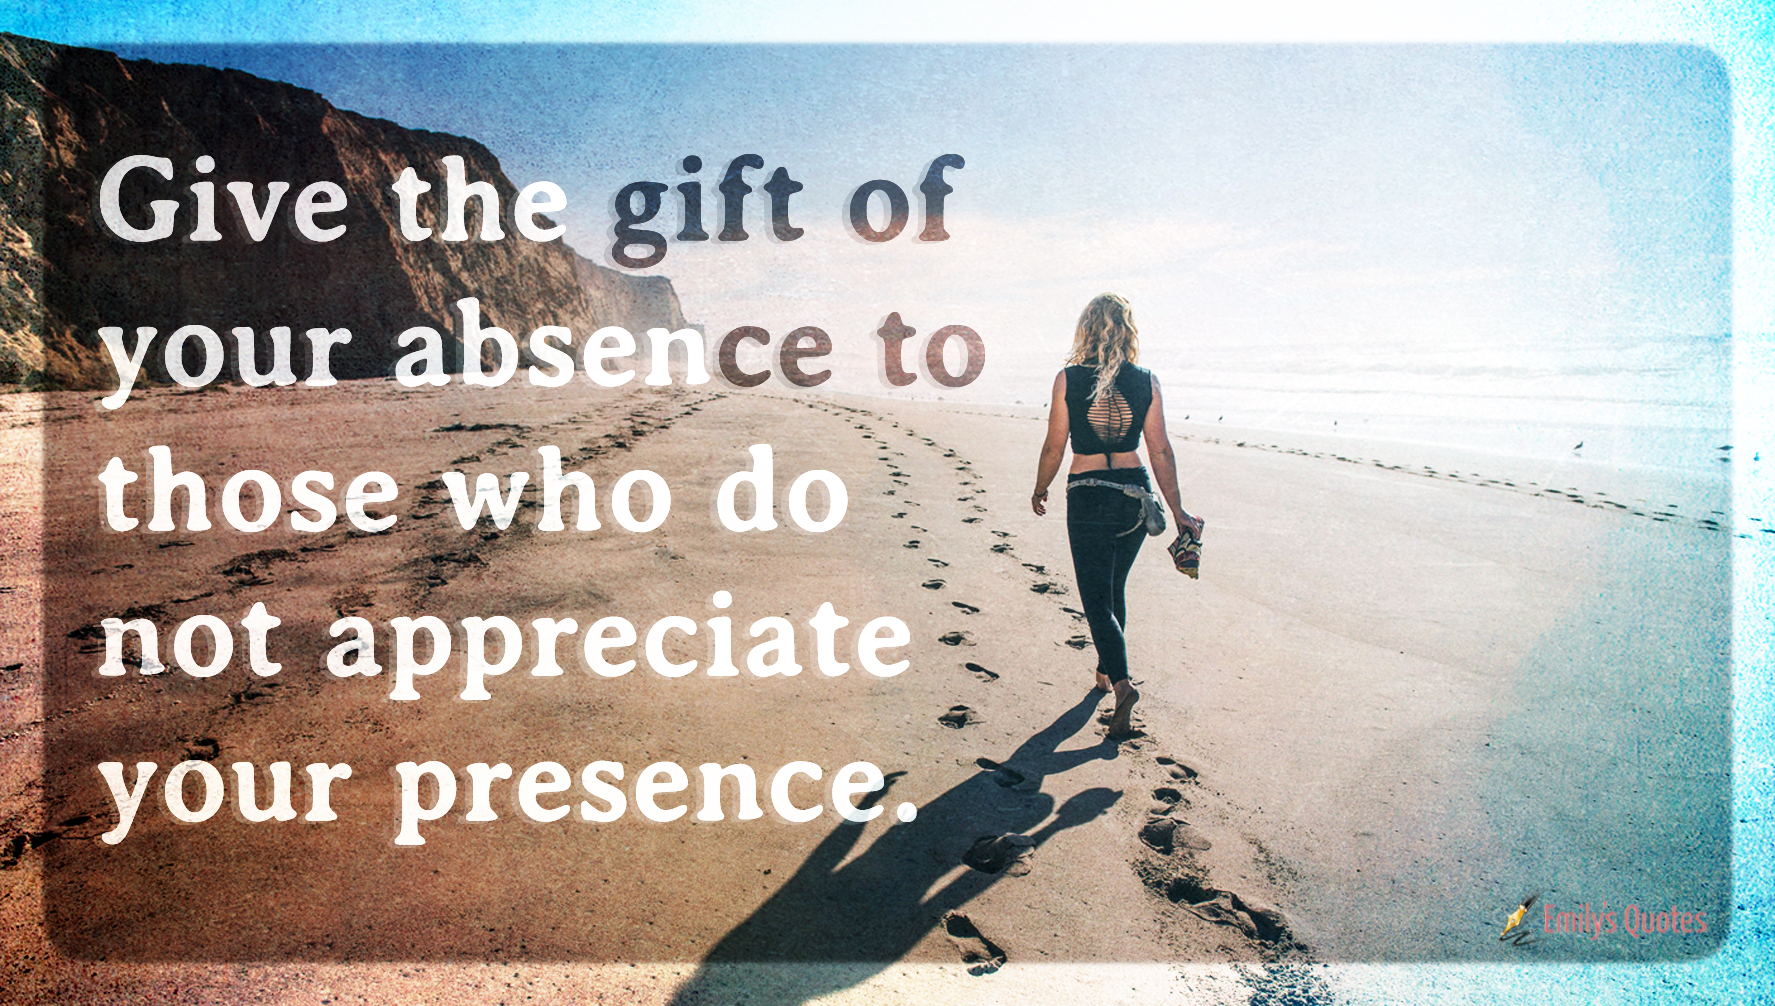 Give the gift of your absence to those who do not appreciate your presence